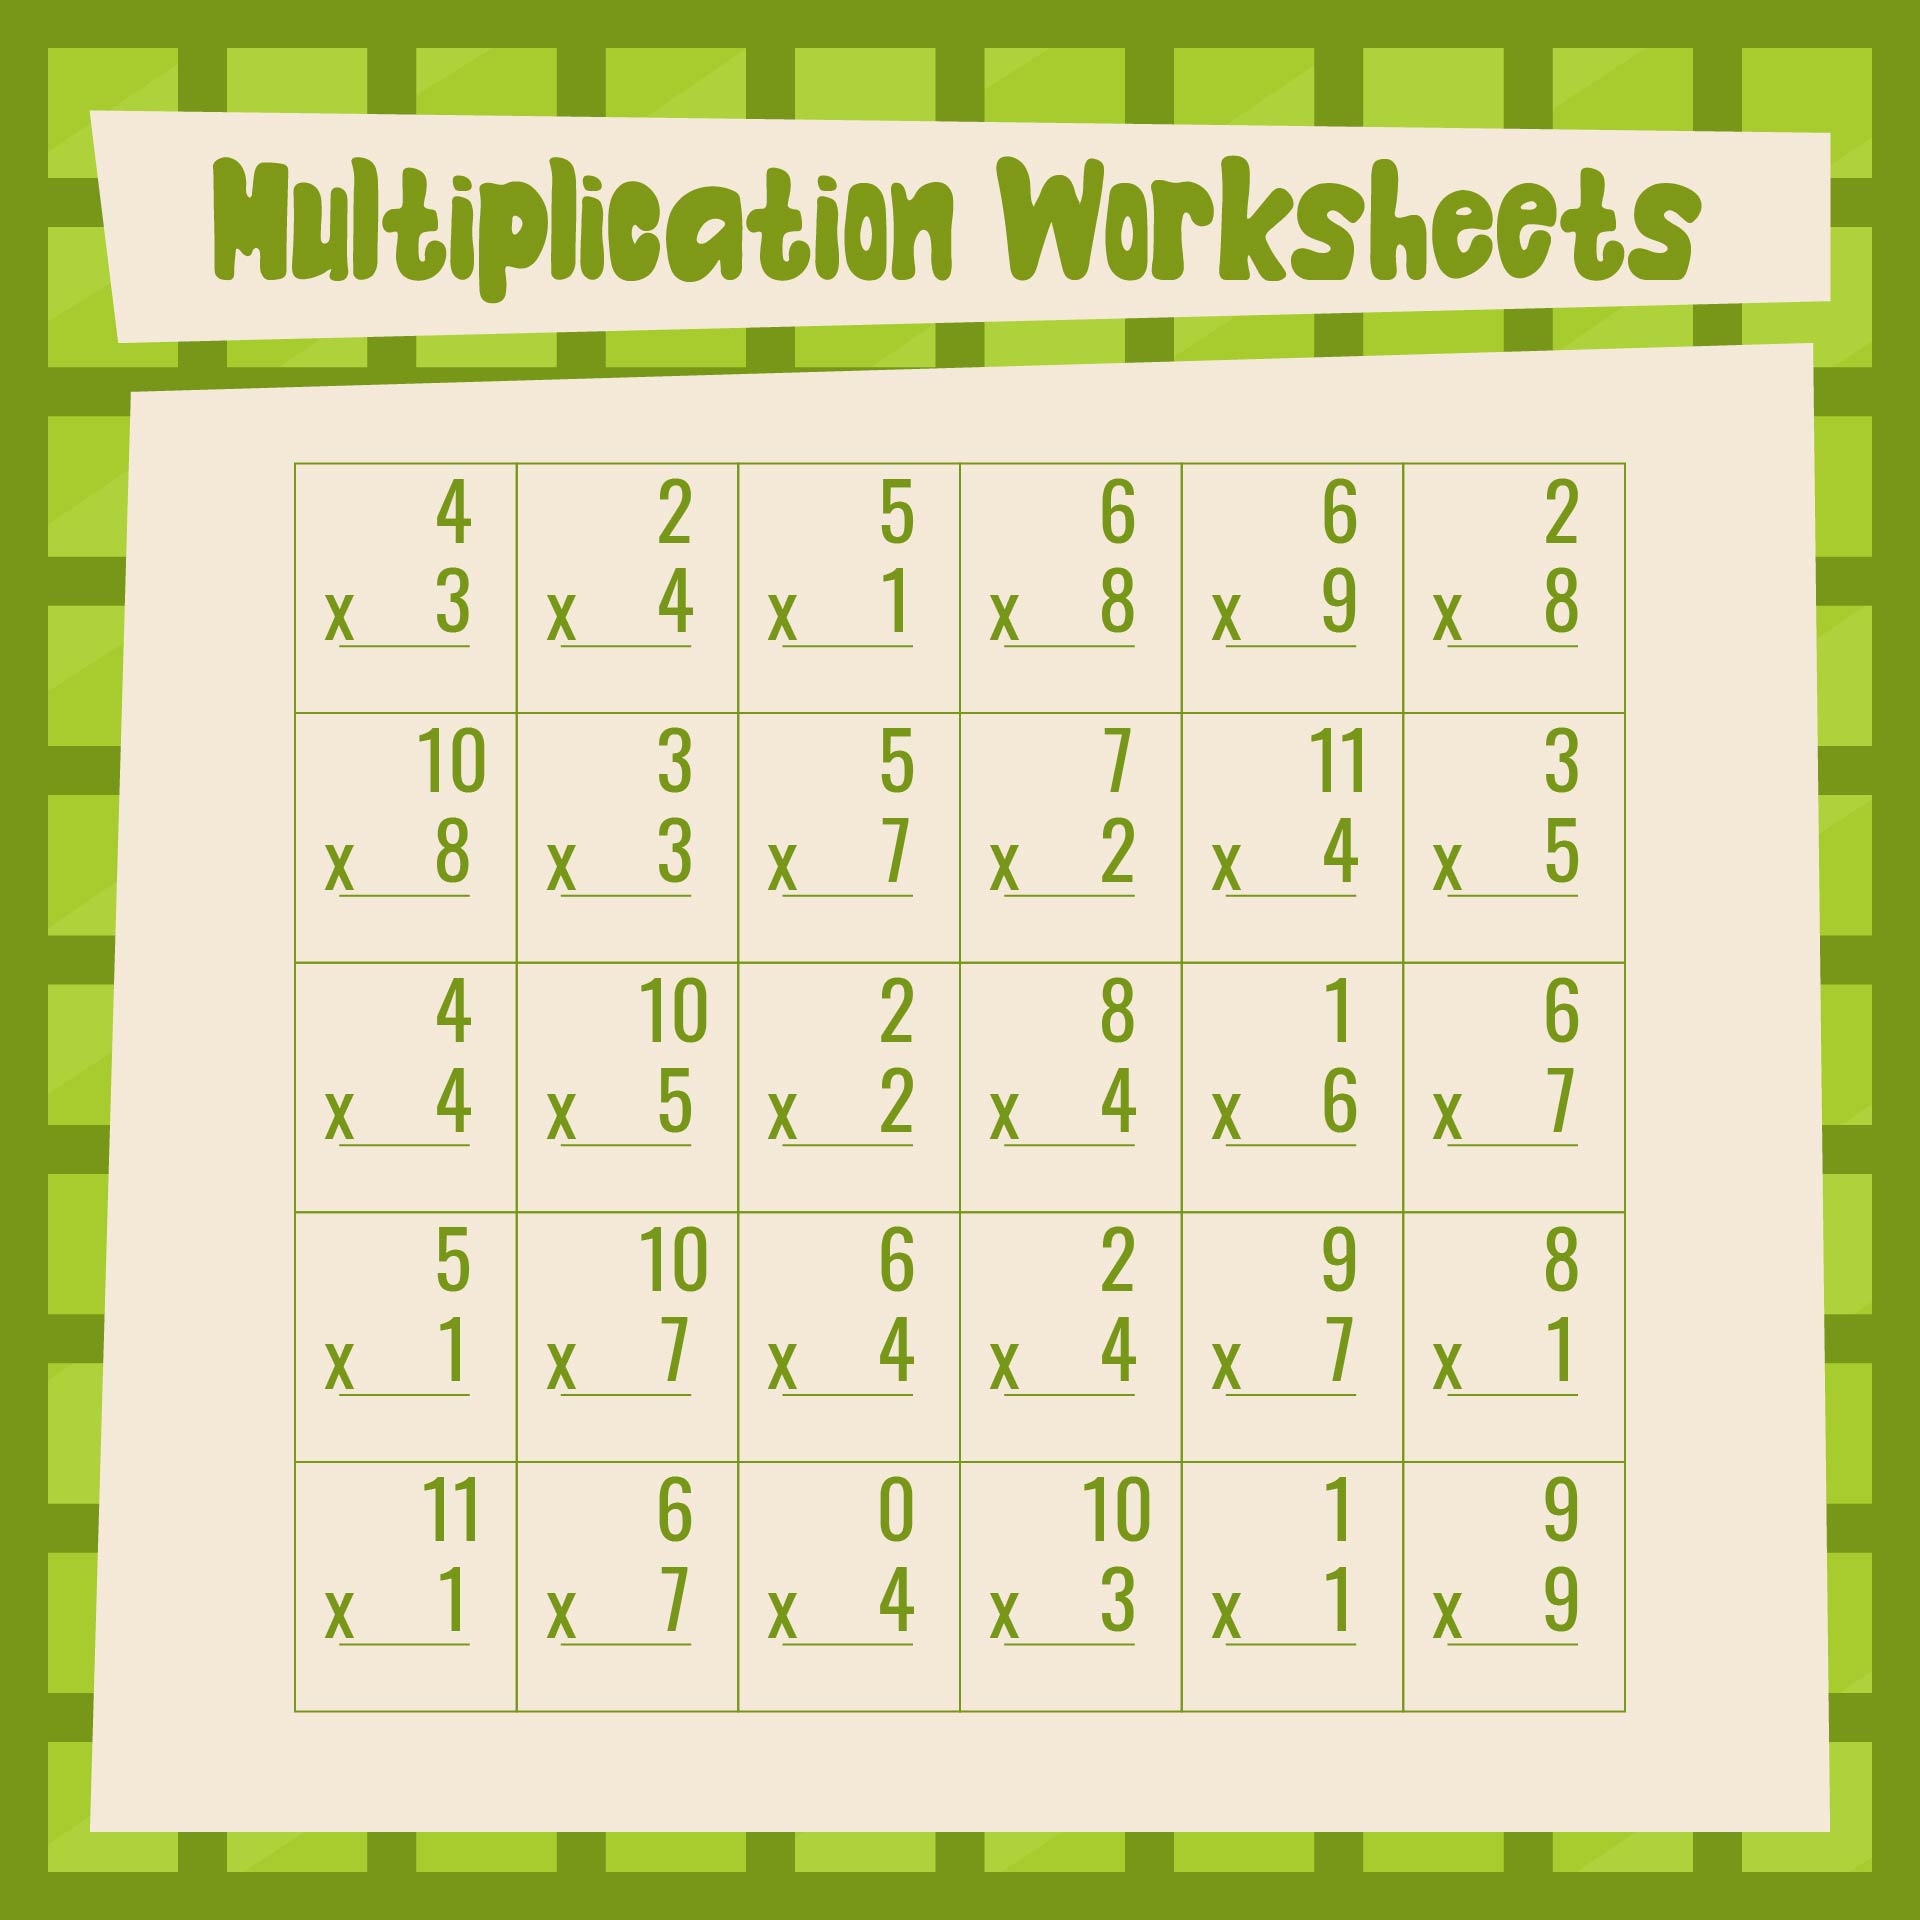 1-minute-multiplication-worksheet-education-math-math-drills-education-quotes-for